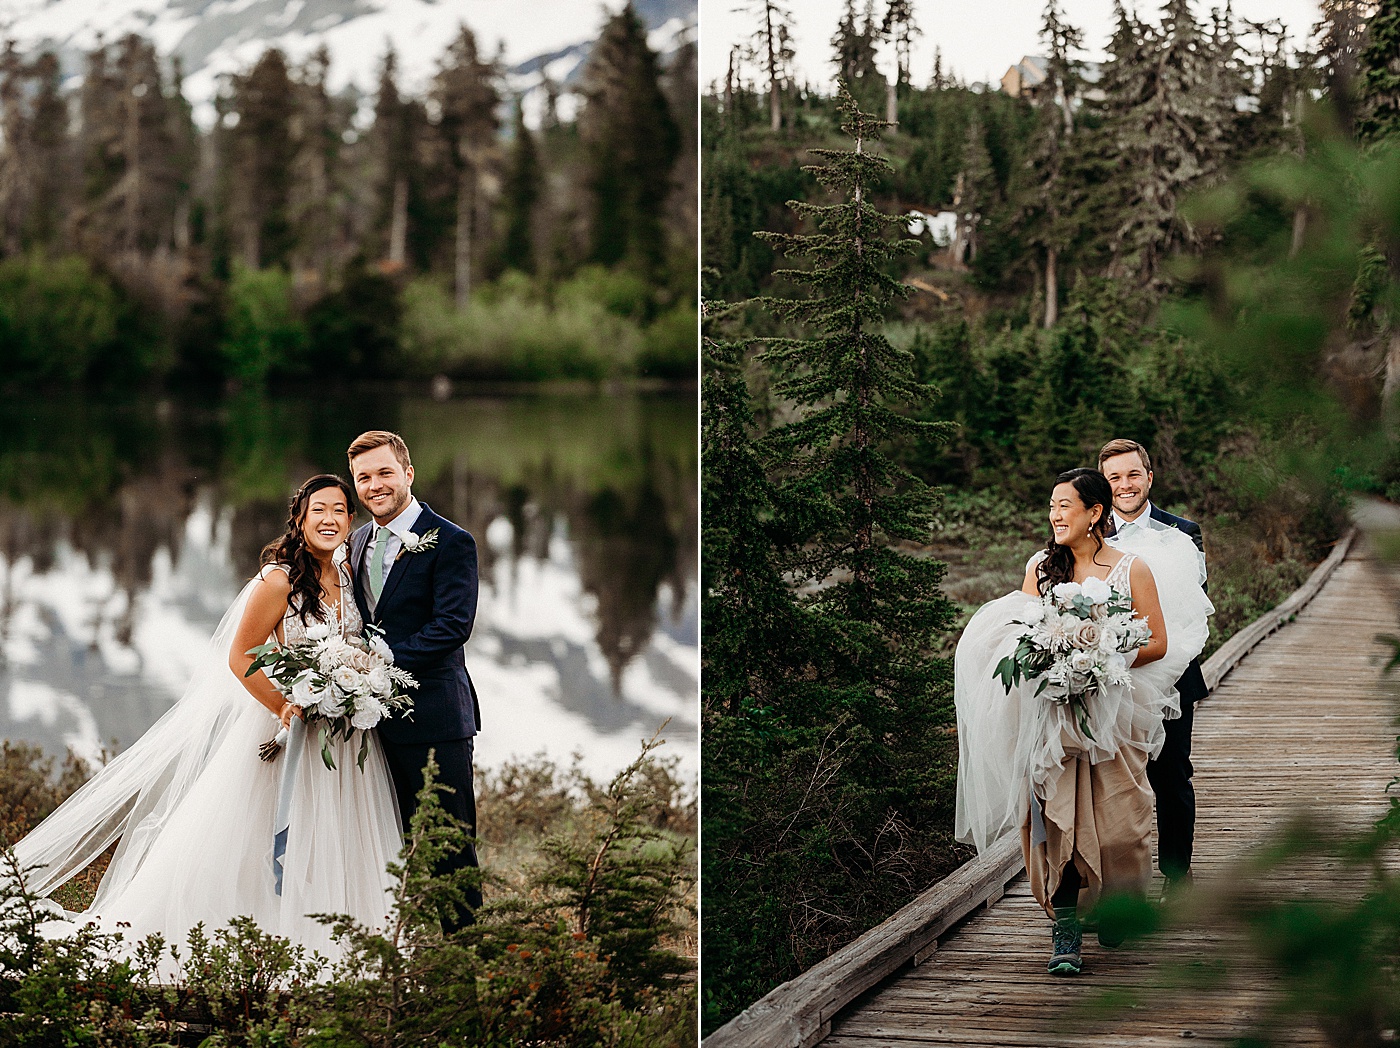 Washington Elopement in the Summer at Picture Lake | Megan Montalvo Photography